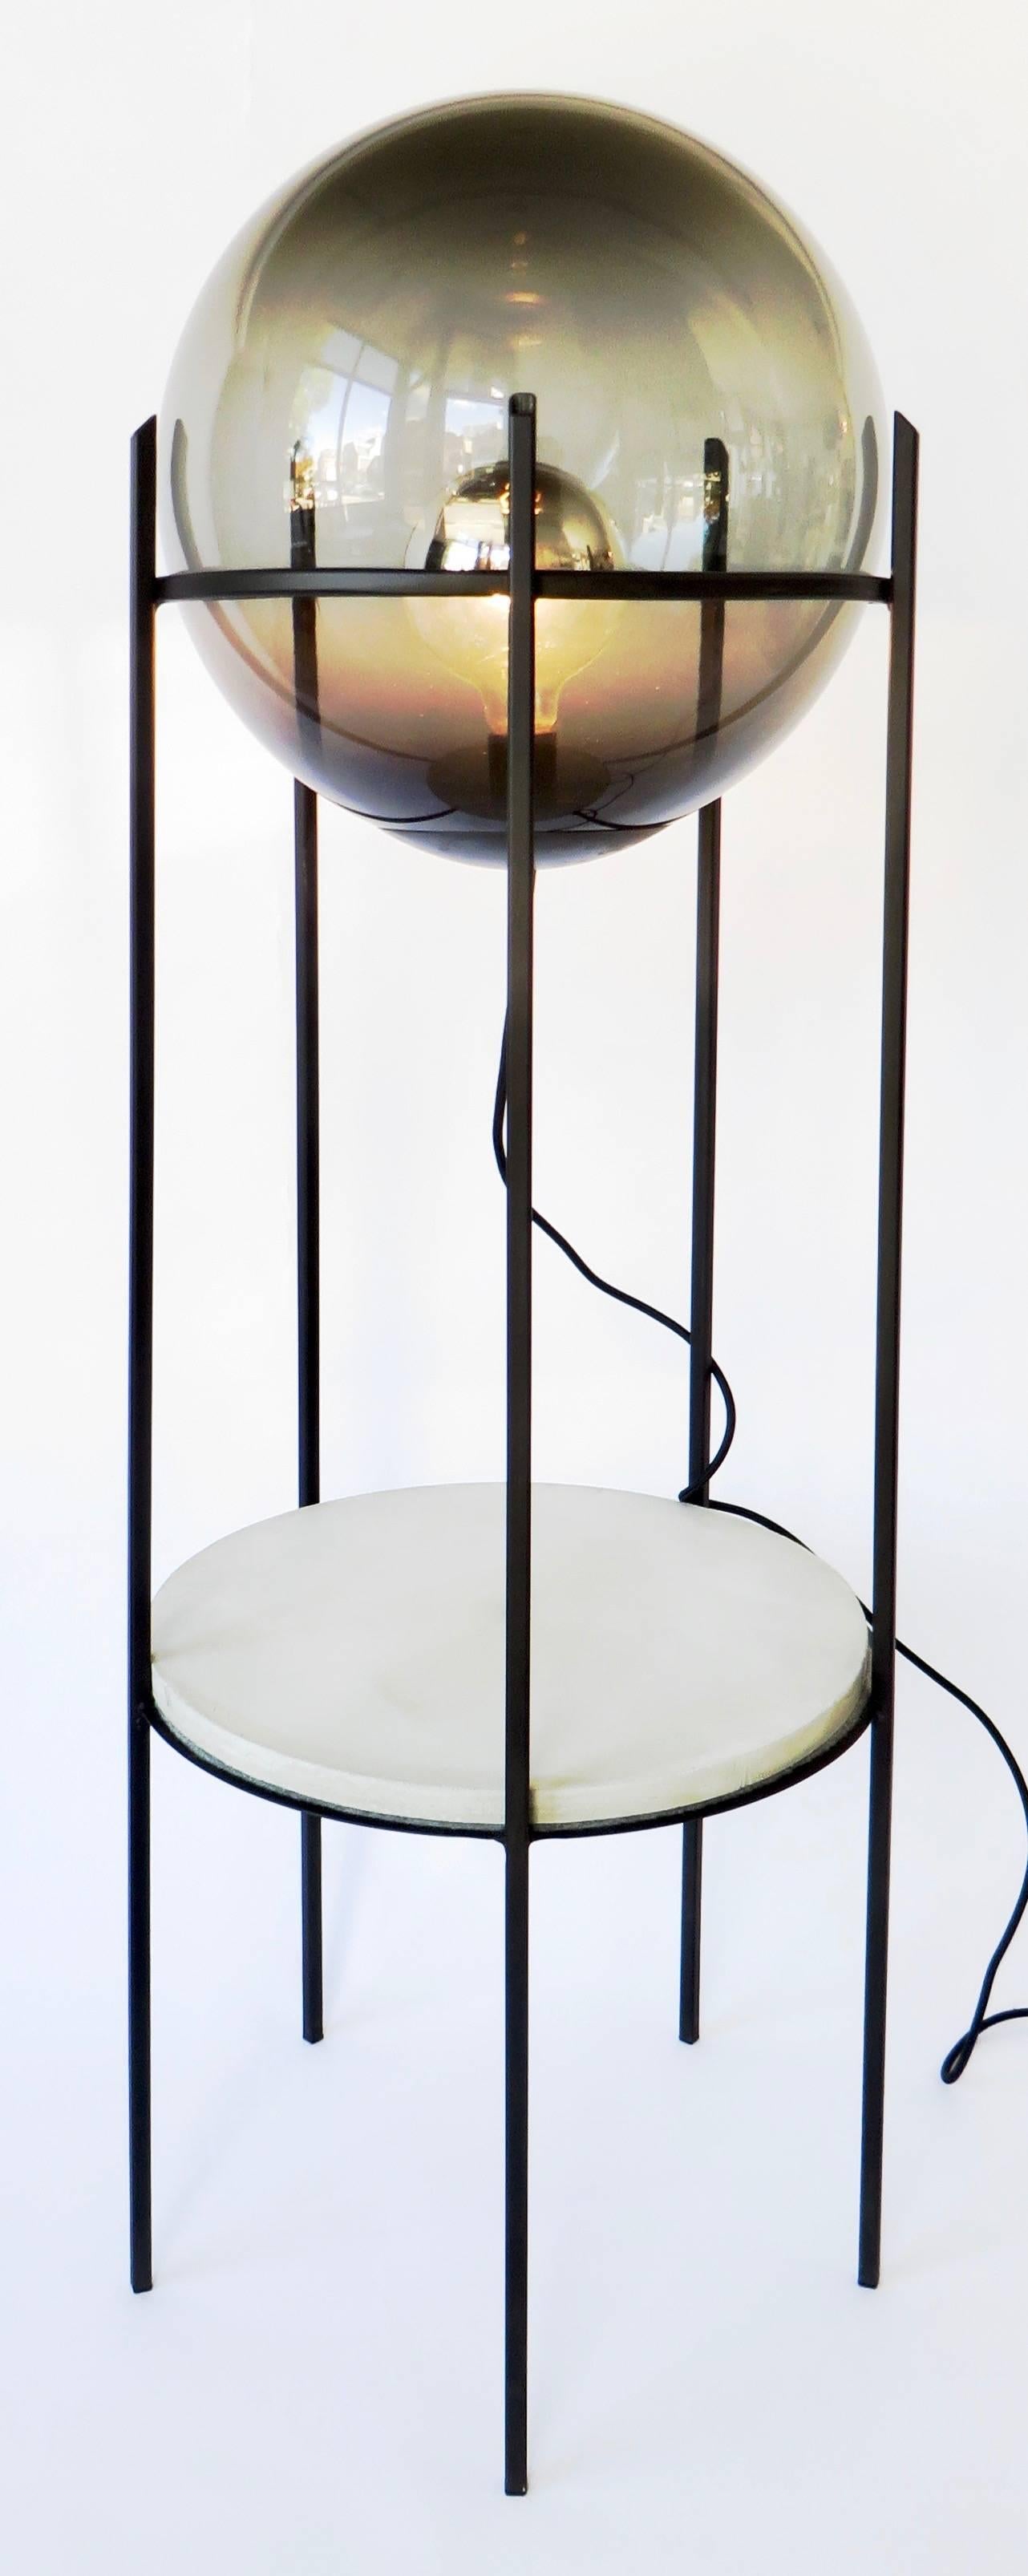 Two level lamp by contemporary artist and designer Hannah Vaughn.
Smoked Lucite globe, cement plateau, and hand-wrought iron structure.
Edition of ten. Signed on underside of cement plateau. #3 in the edition.
6-8 weeks lead time.

Hannah